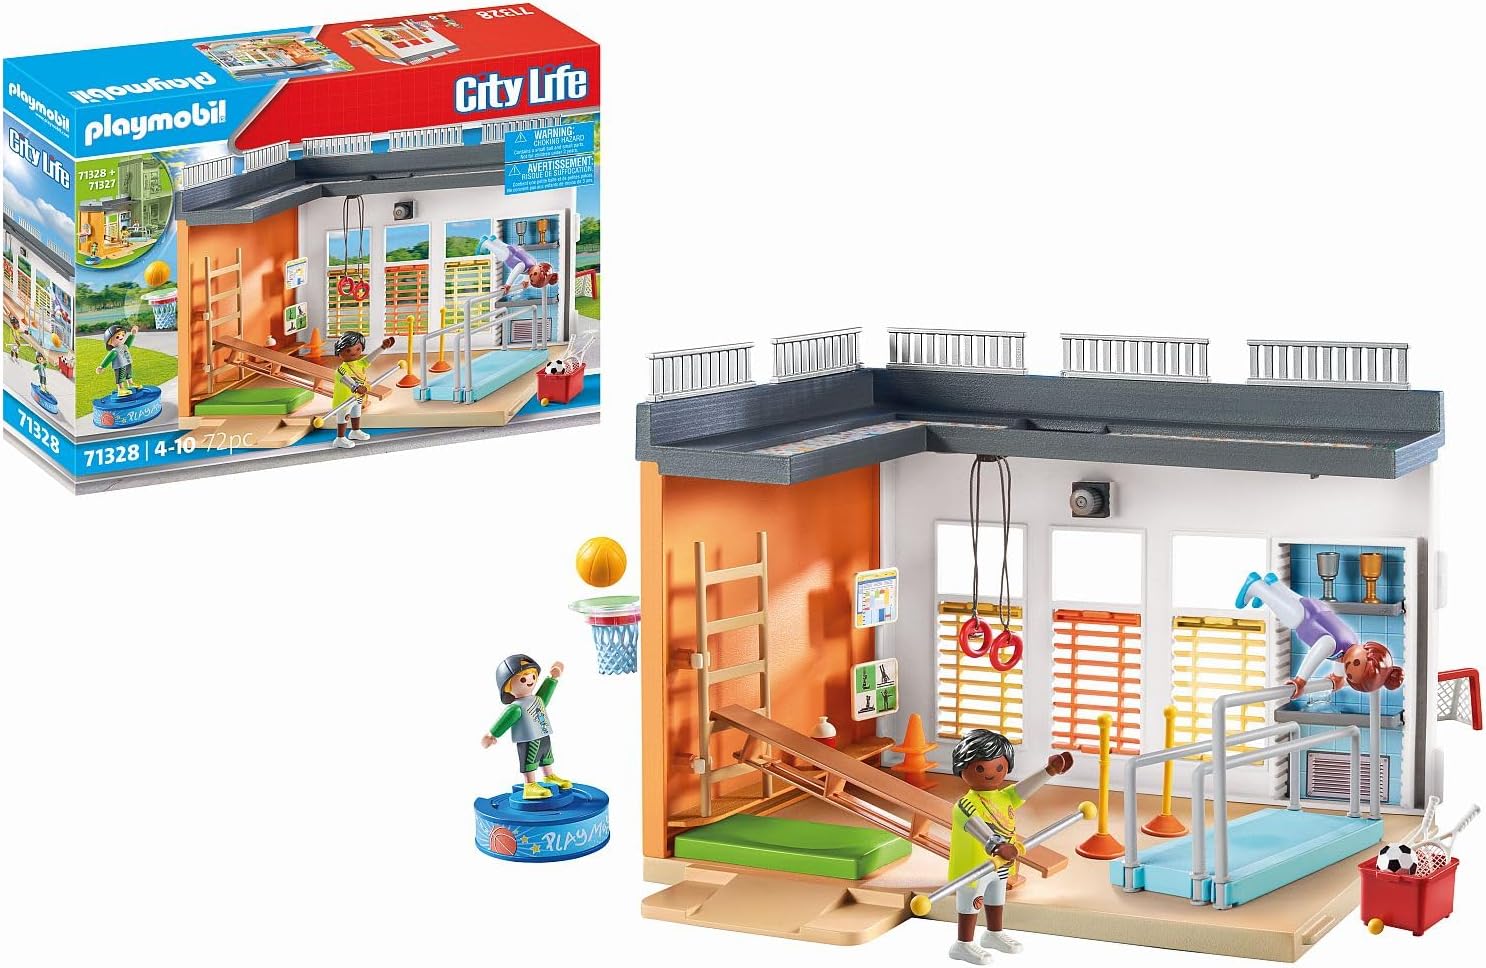 Honest Forwarder  PLAYMOBIL City Life 71328 Extension Gym with